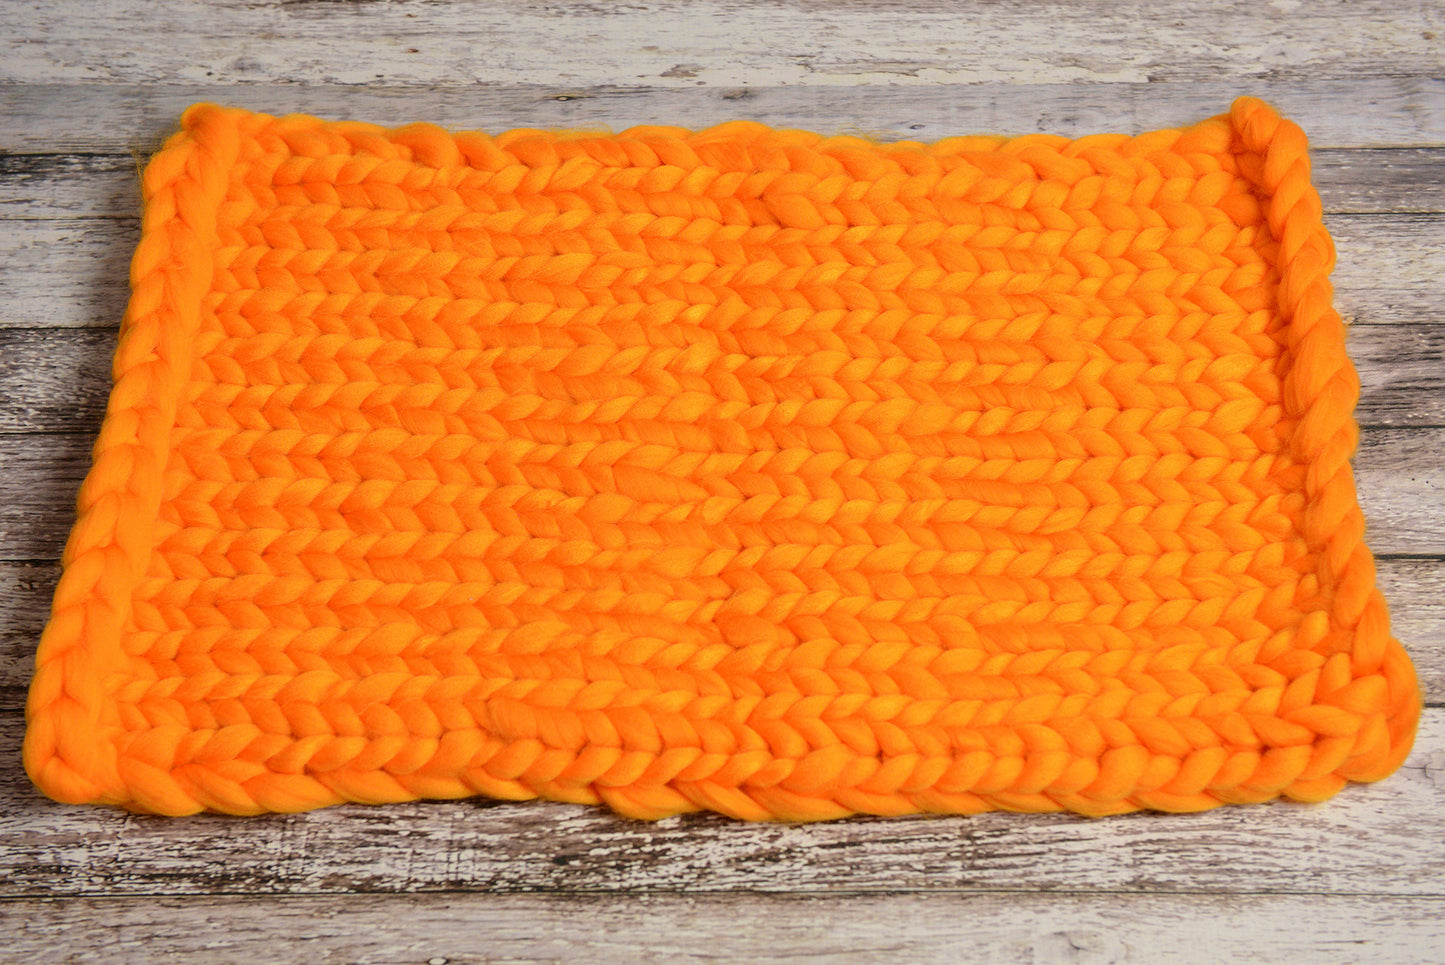 Knitted Thick Yarn Blanket - Orange-Newborn Photography Props